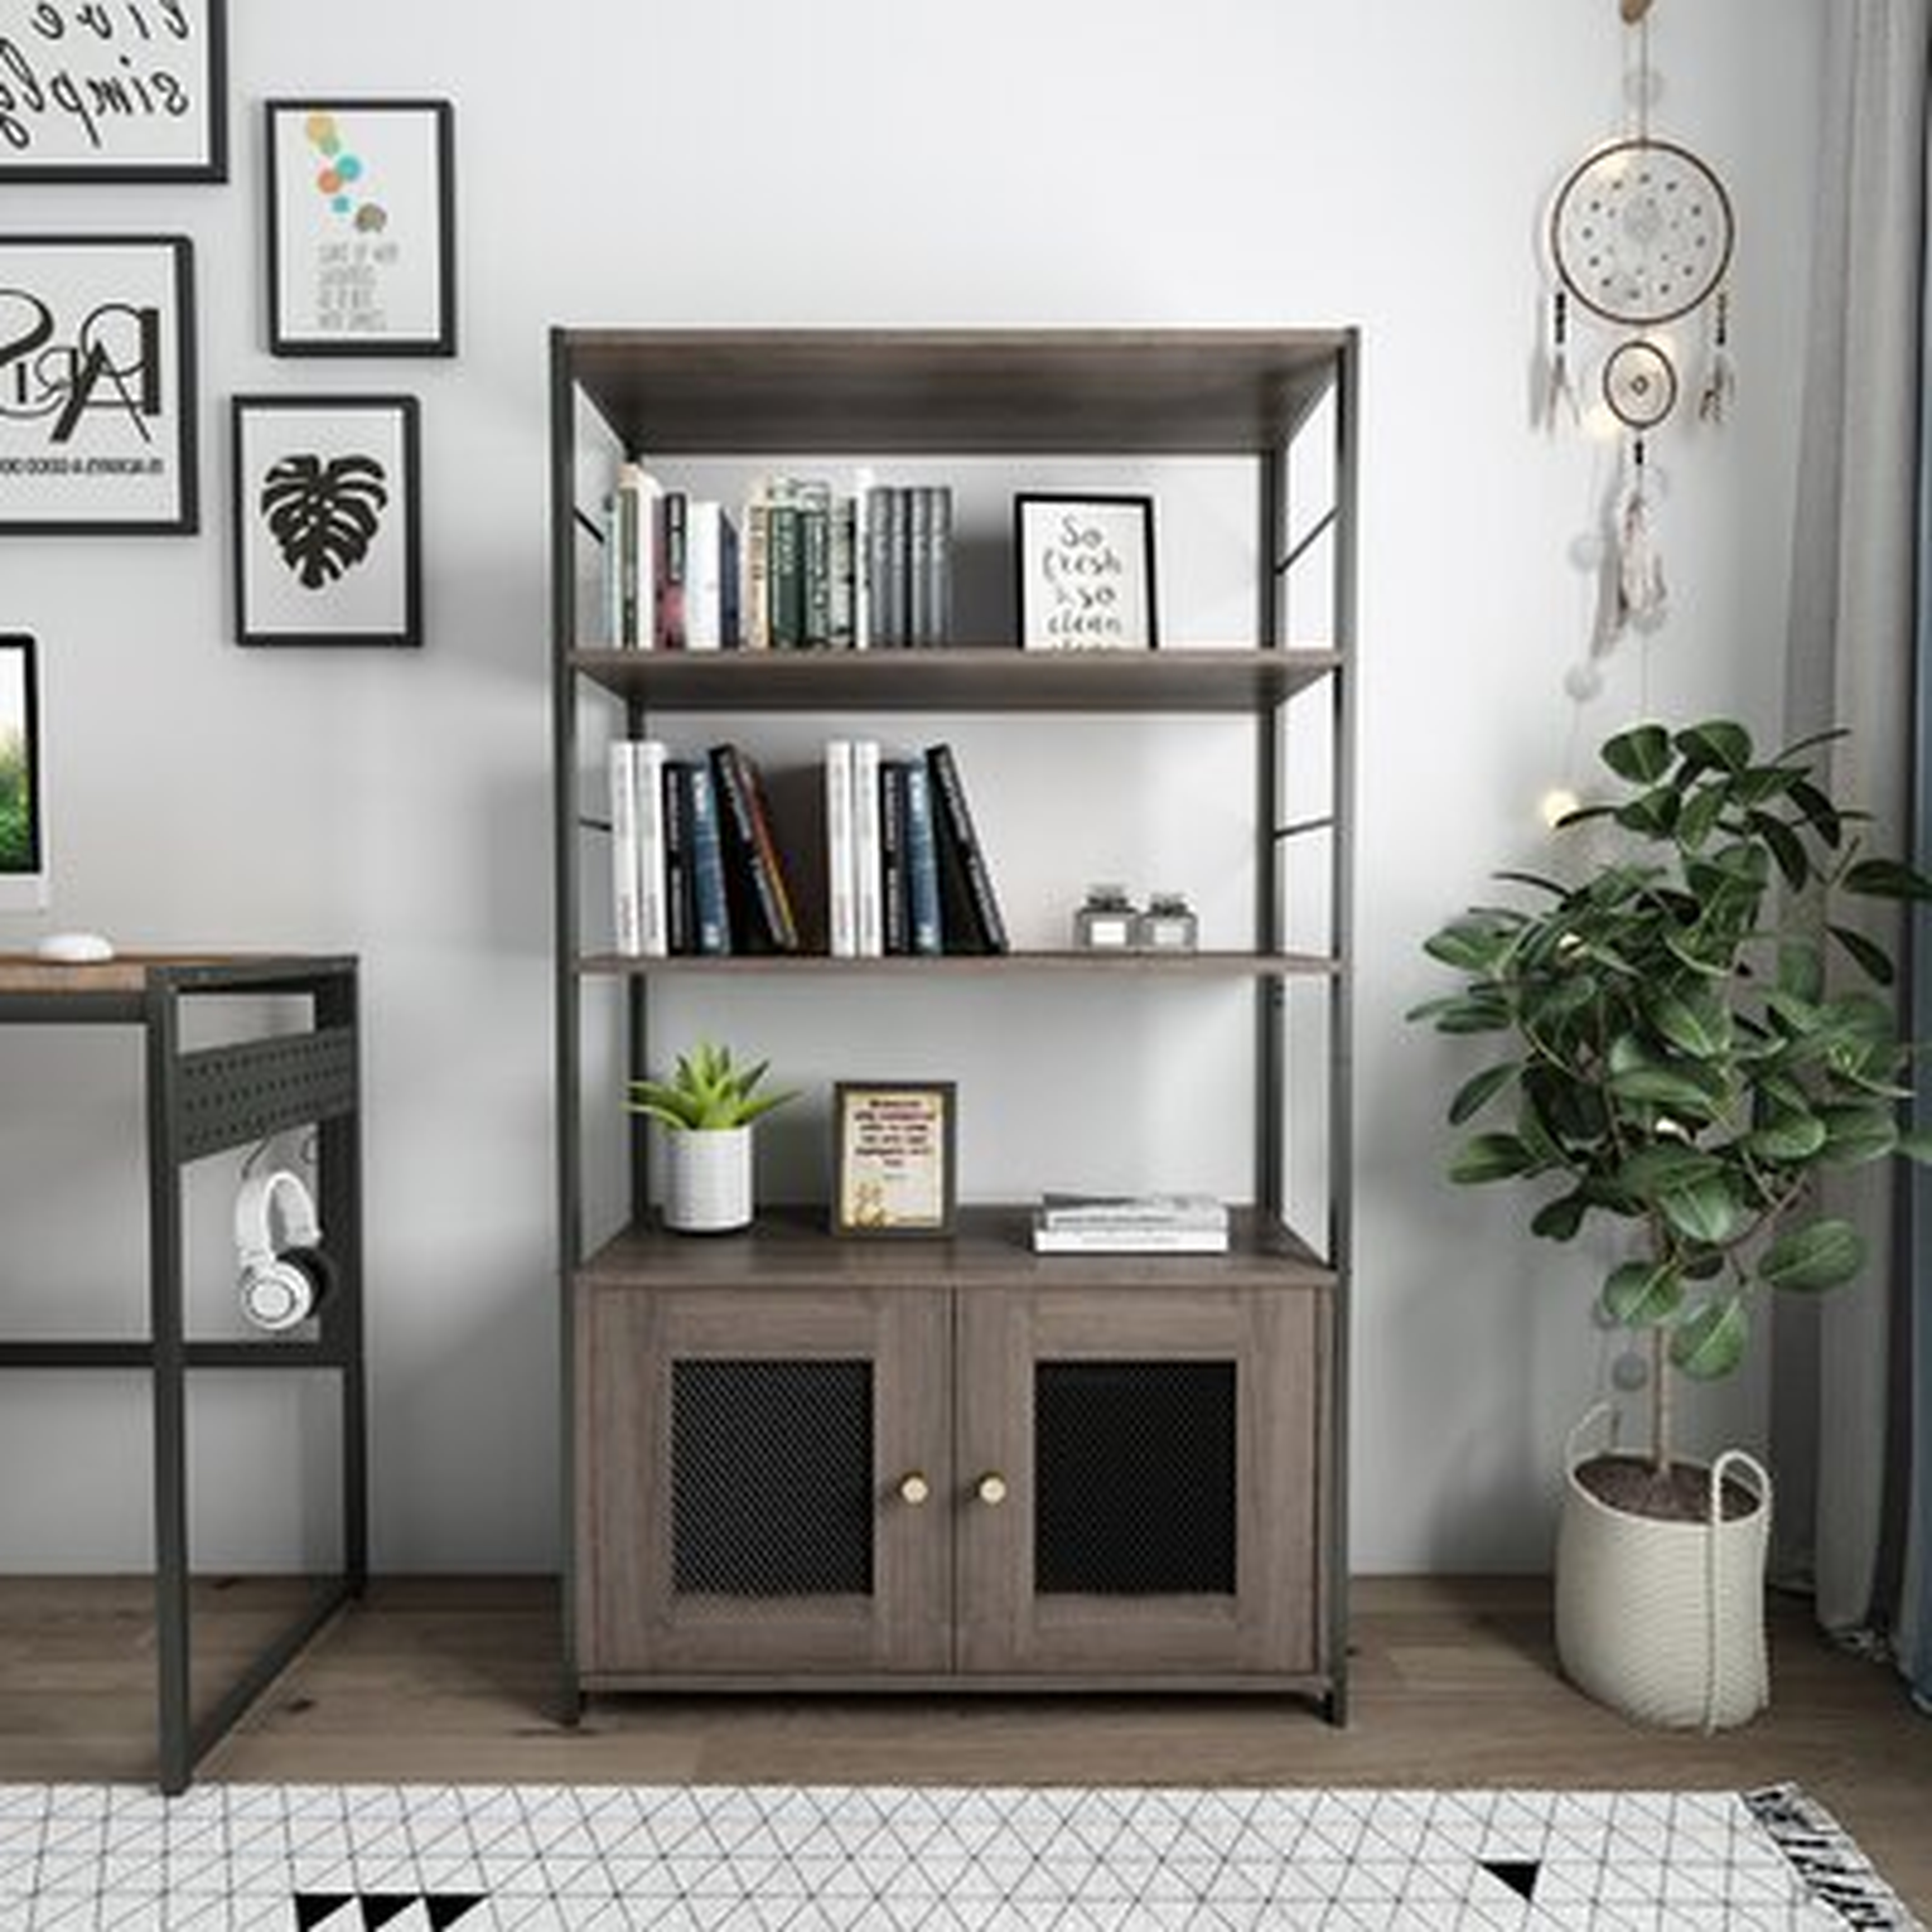 47.6" H X 27" W Industrial Style Metal Standard Bookcase With 3 Shelves And 2 Doors, Living Room Freestanding Storage Cabinet For Home Office - Wayfair